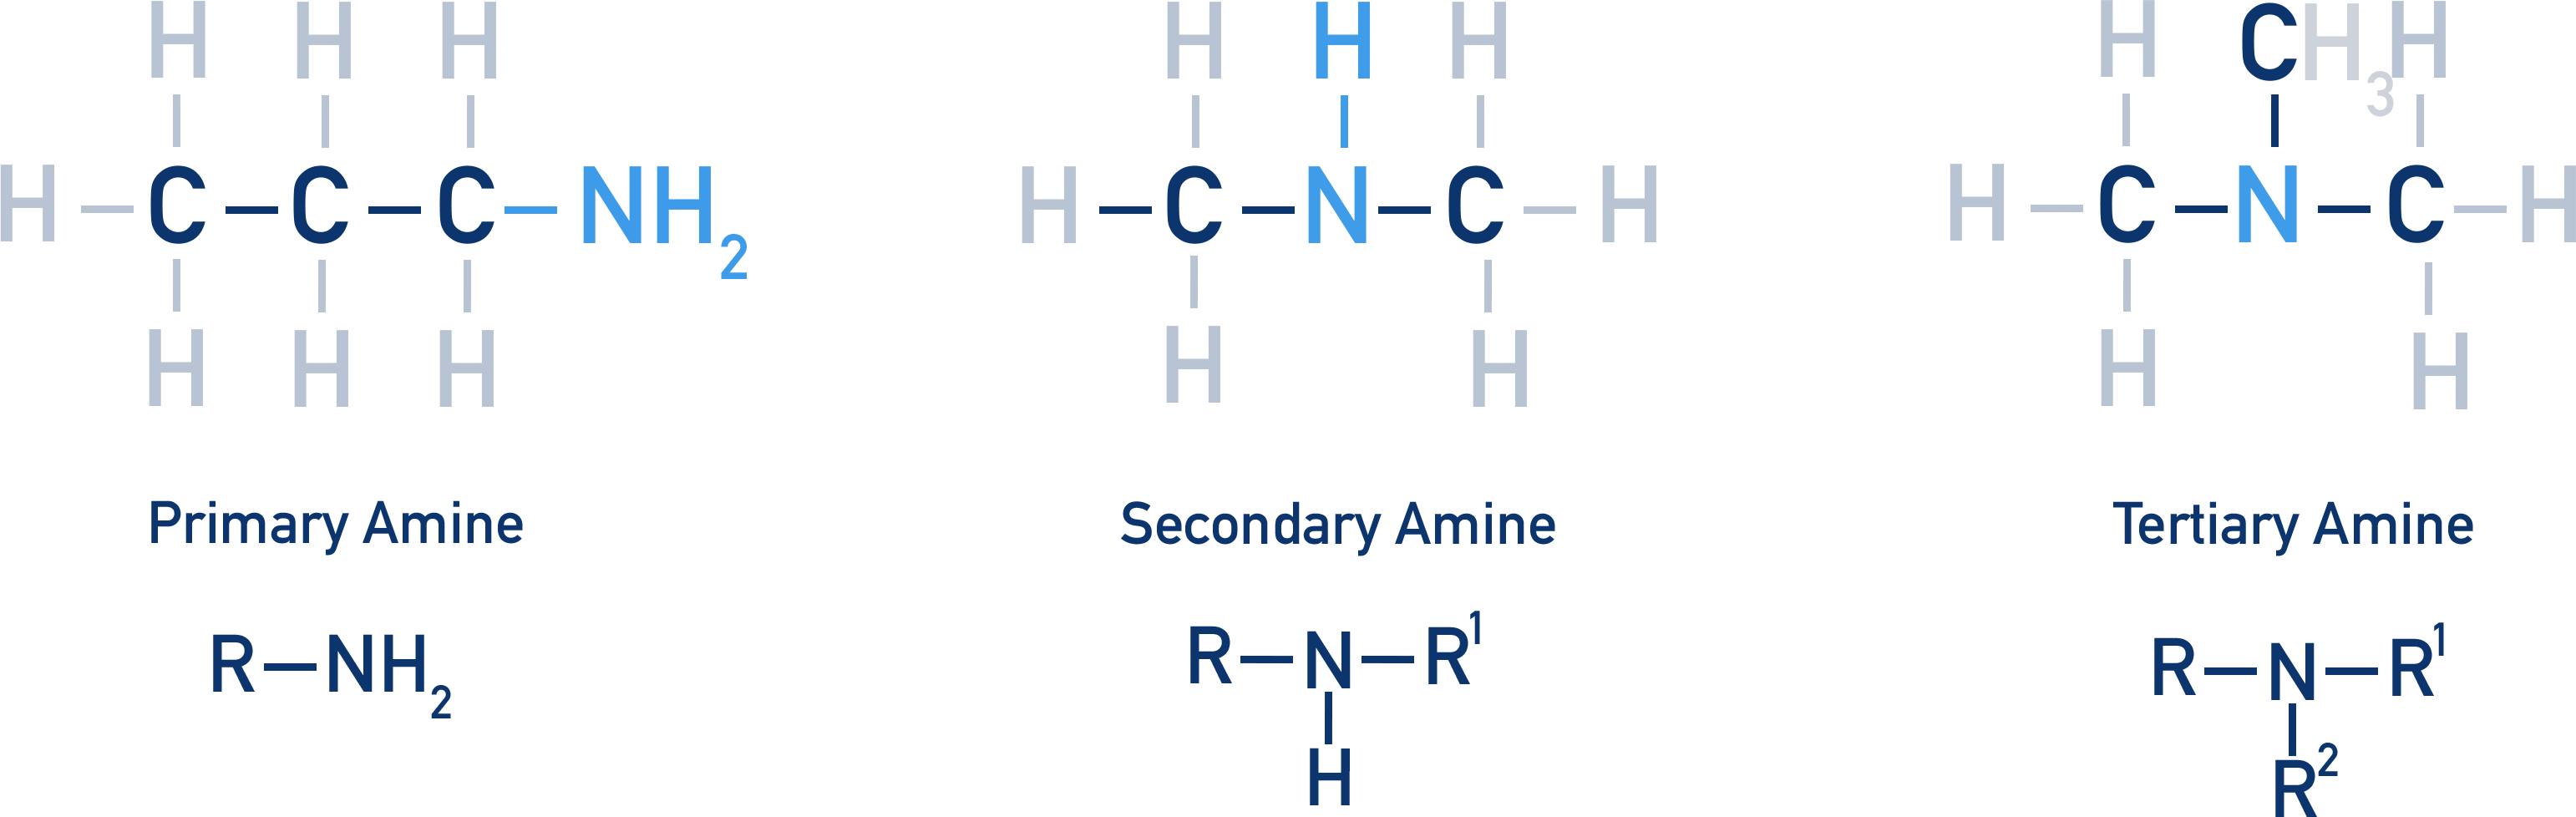 primary secondary tertiary amine structure